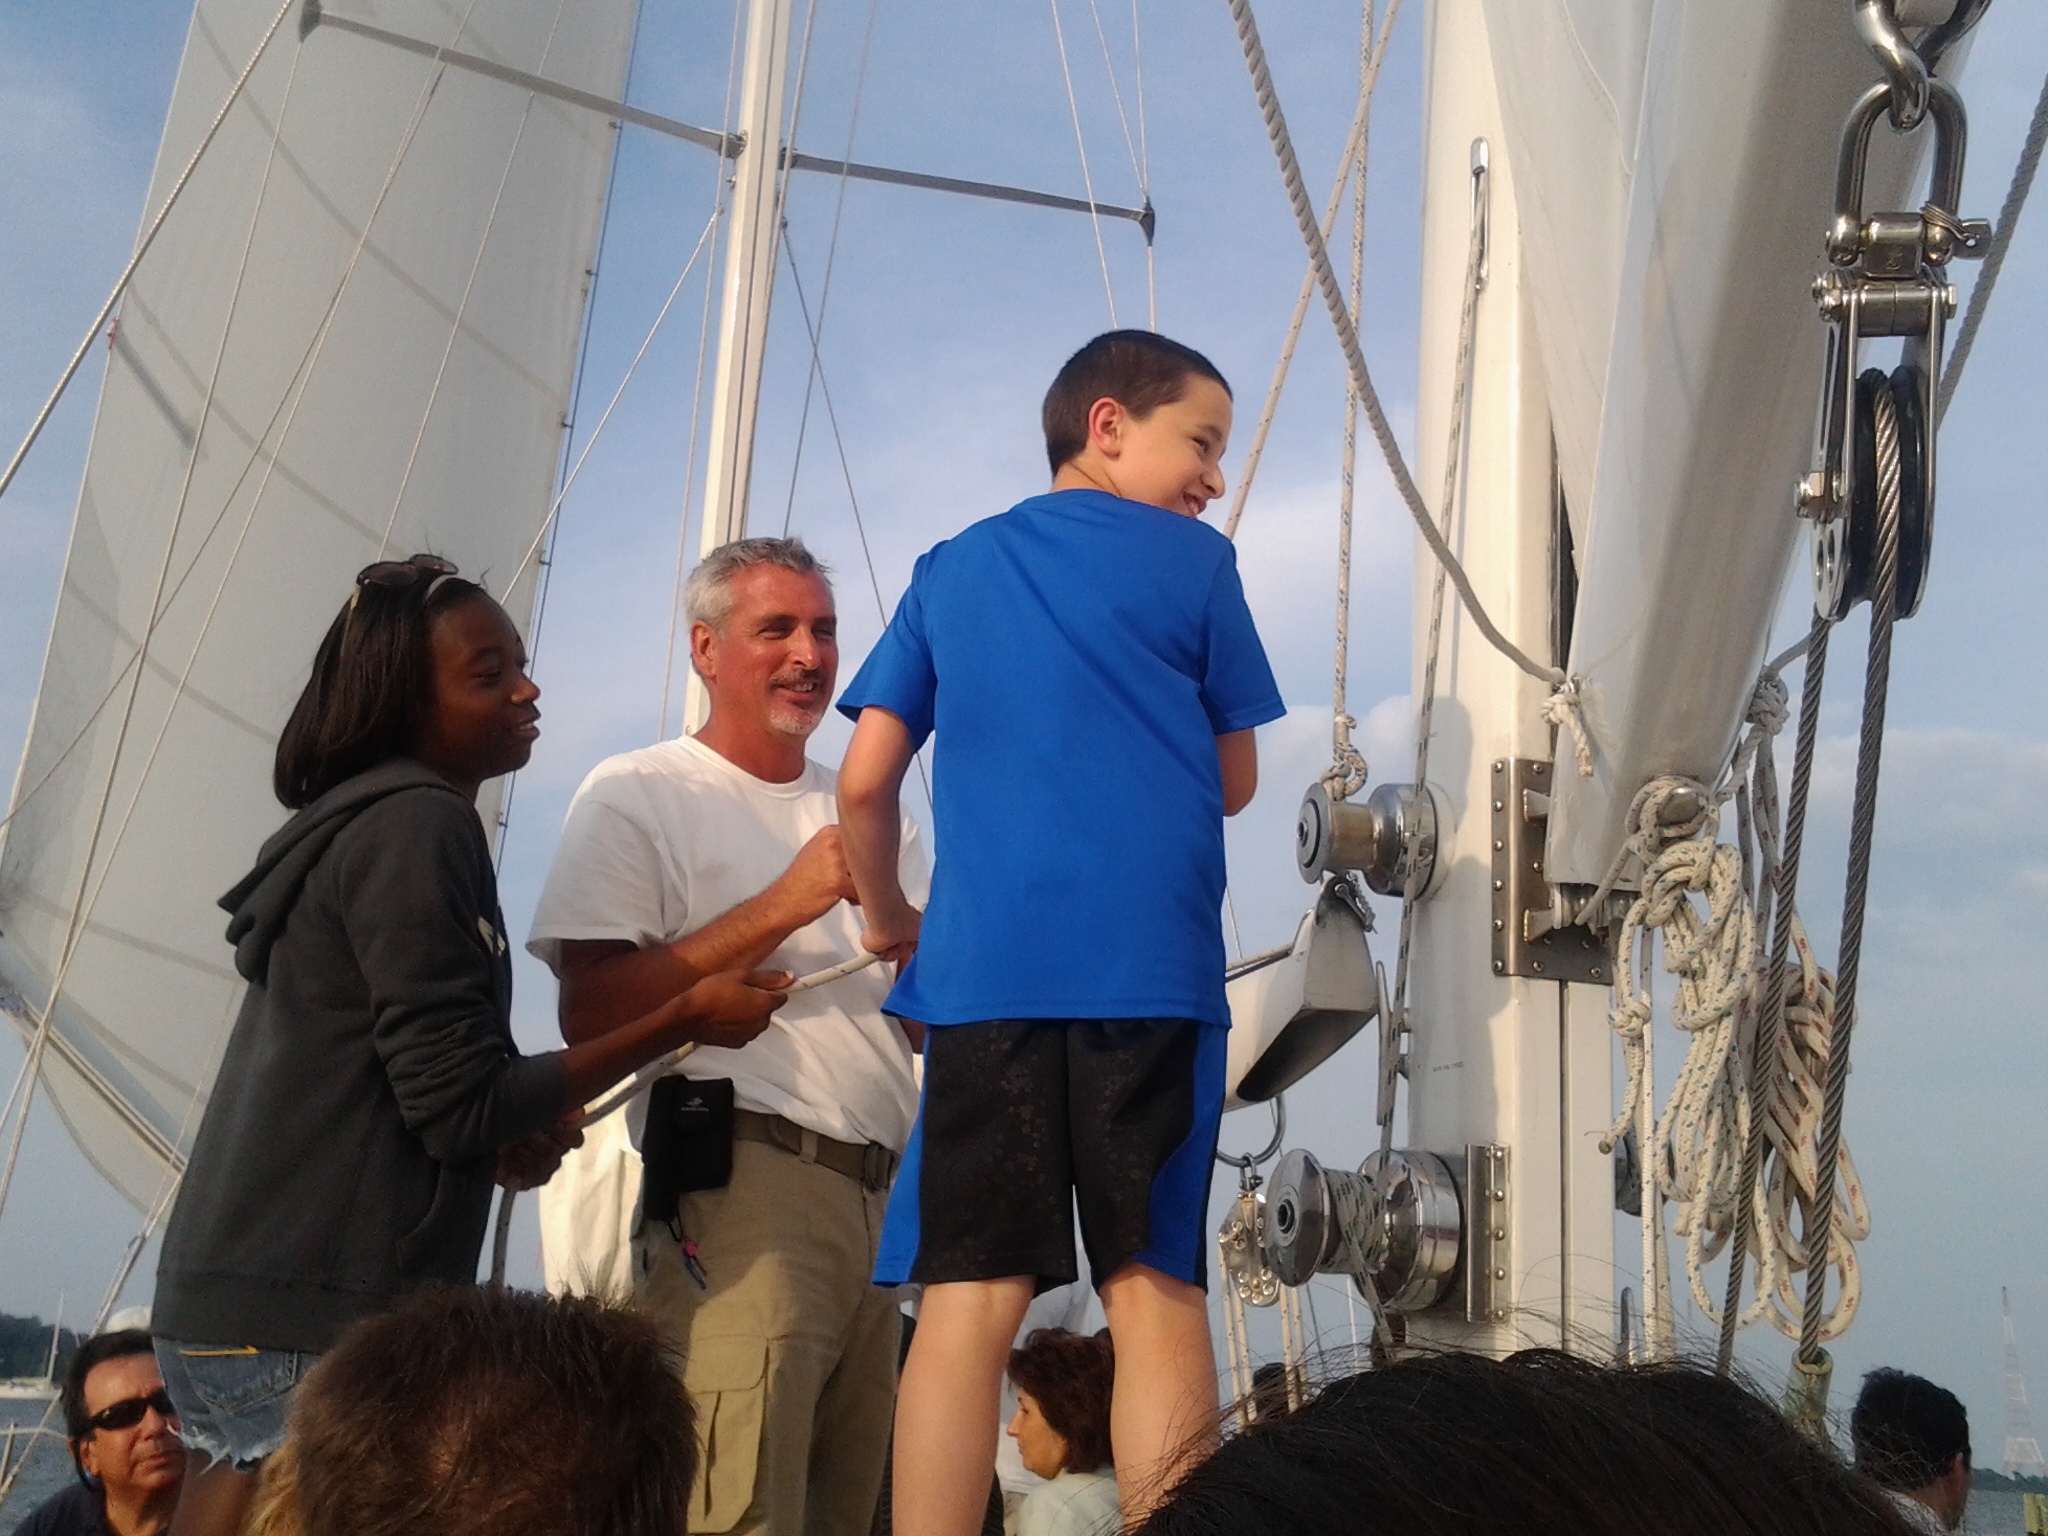 Young man laughing and helping with sails